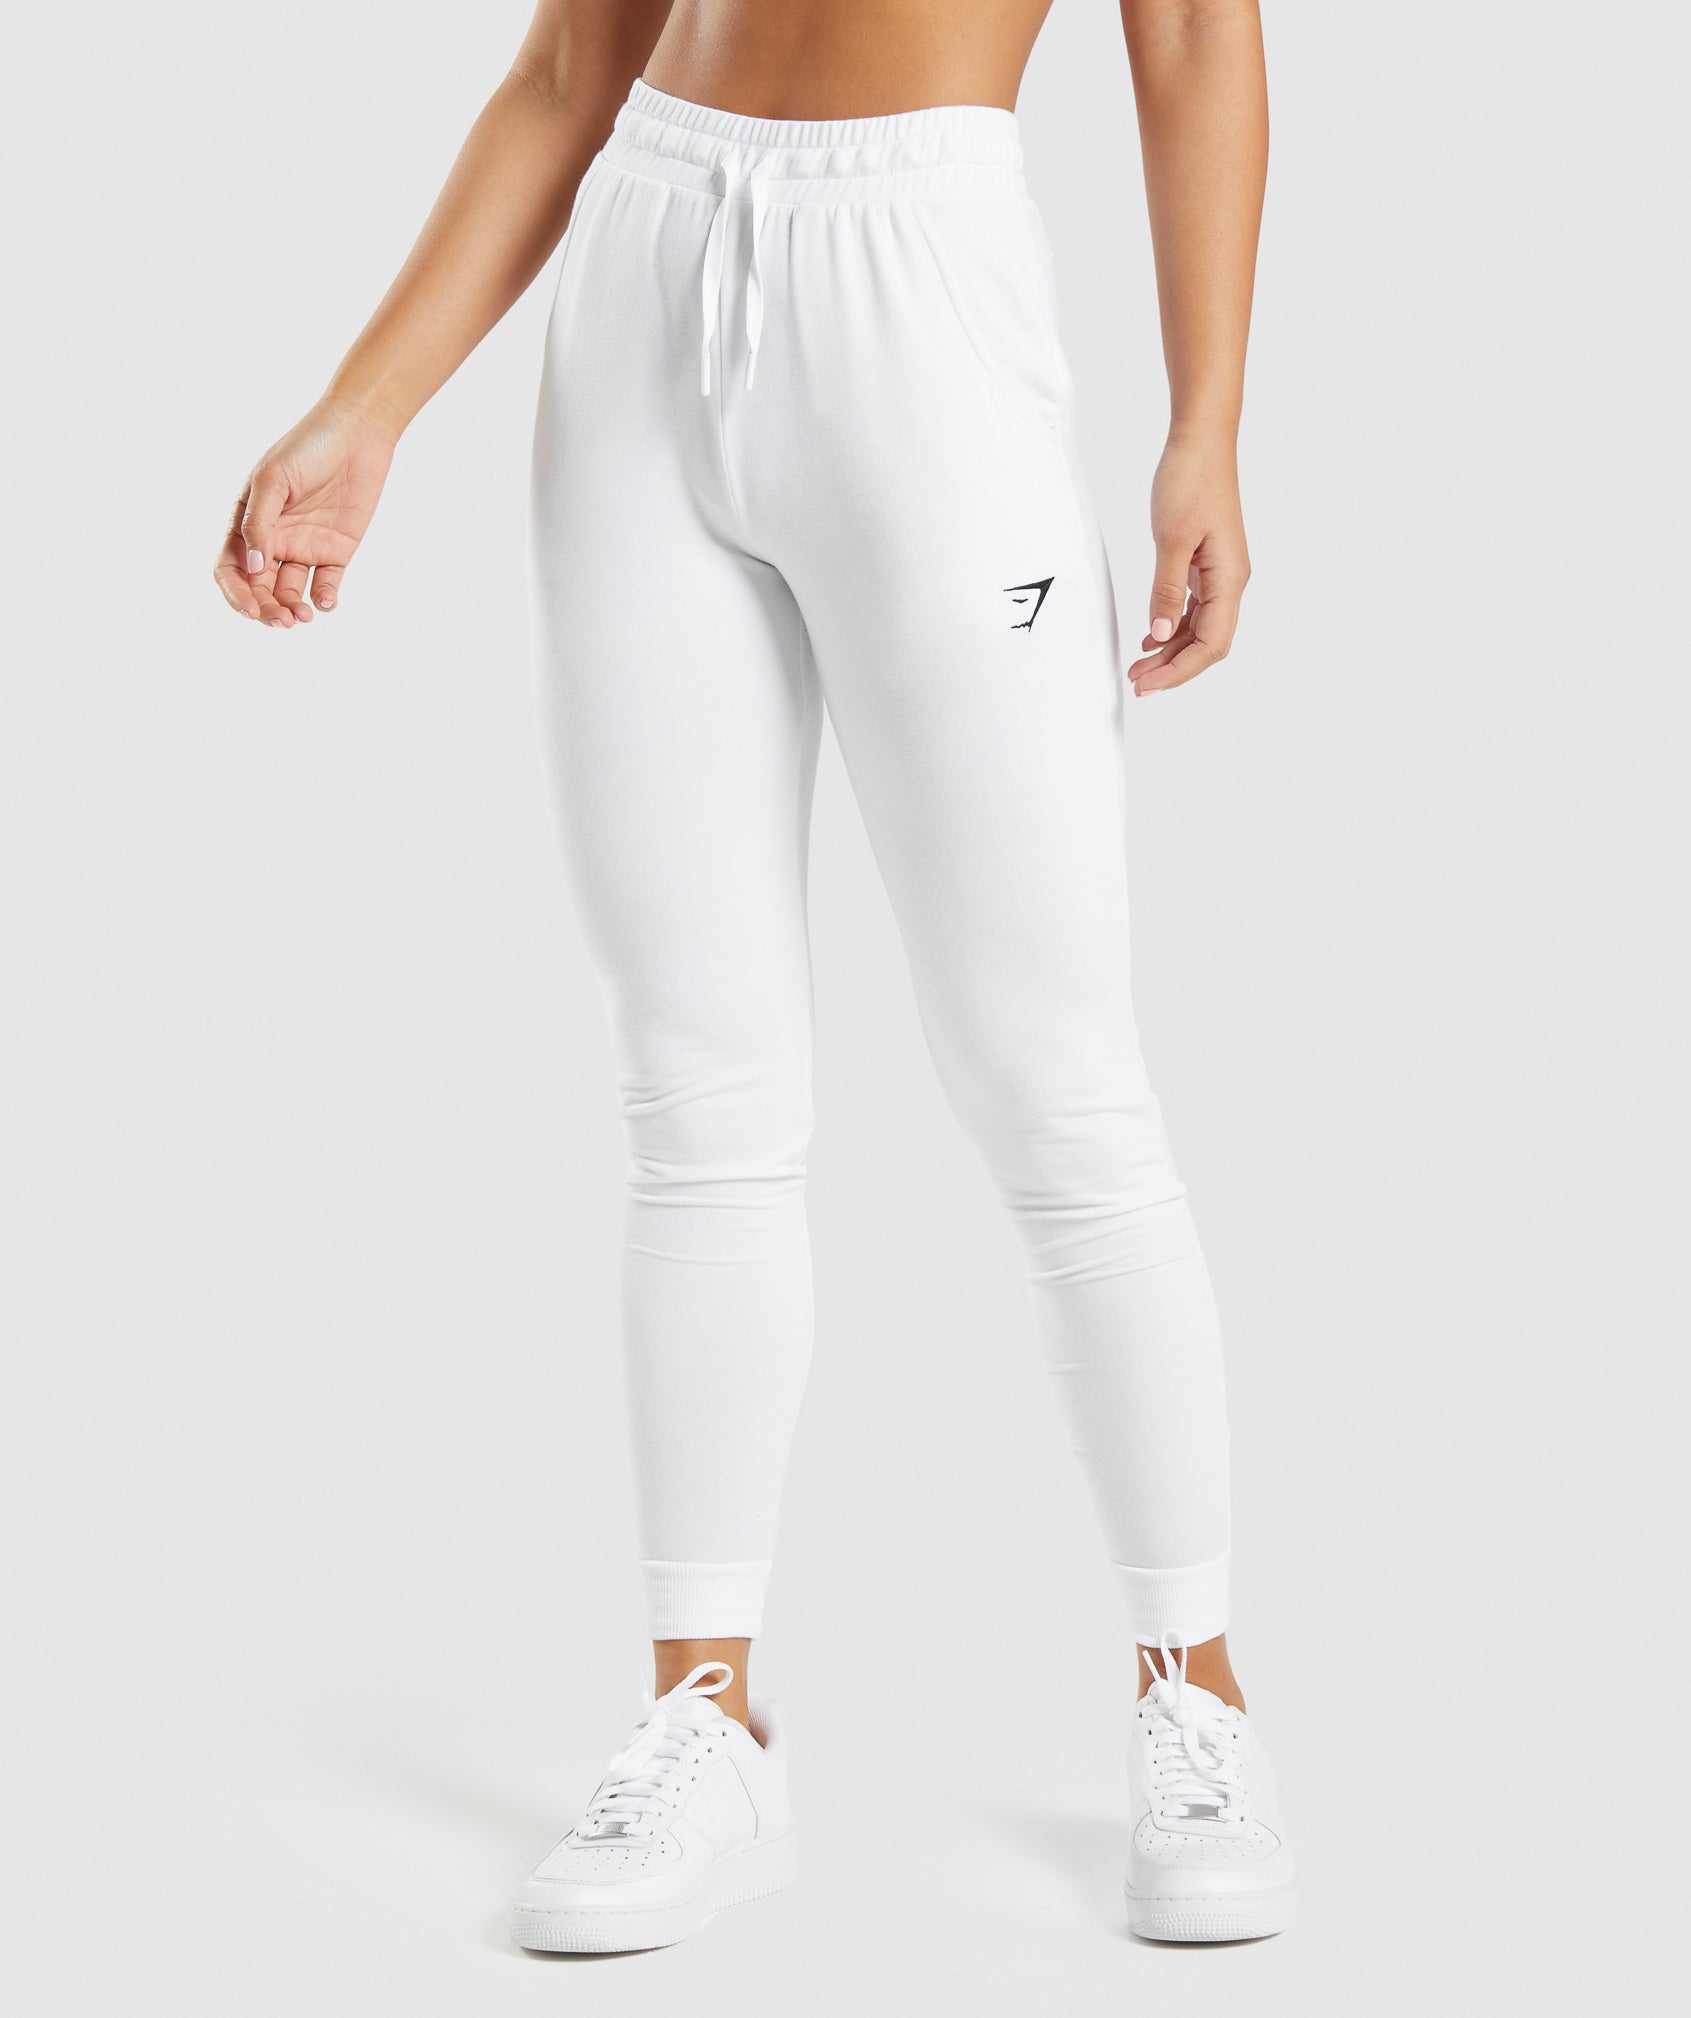 Training Pippa Joggers in White